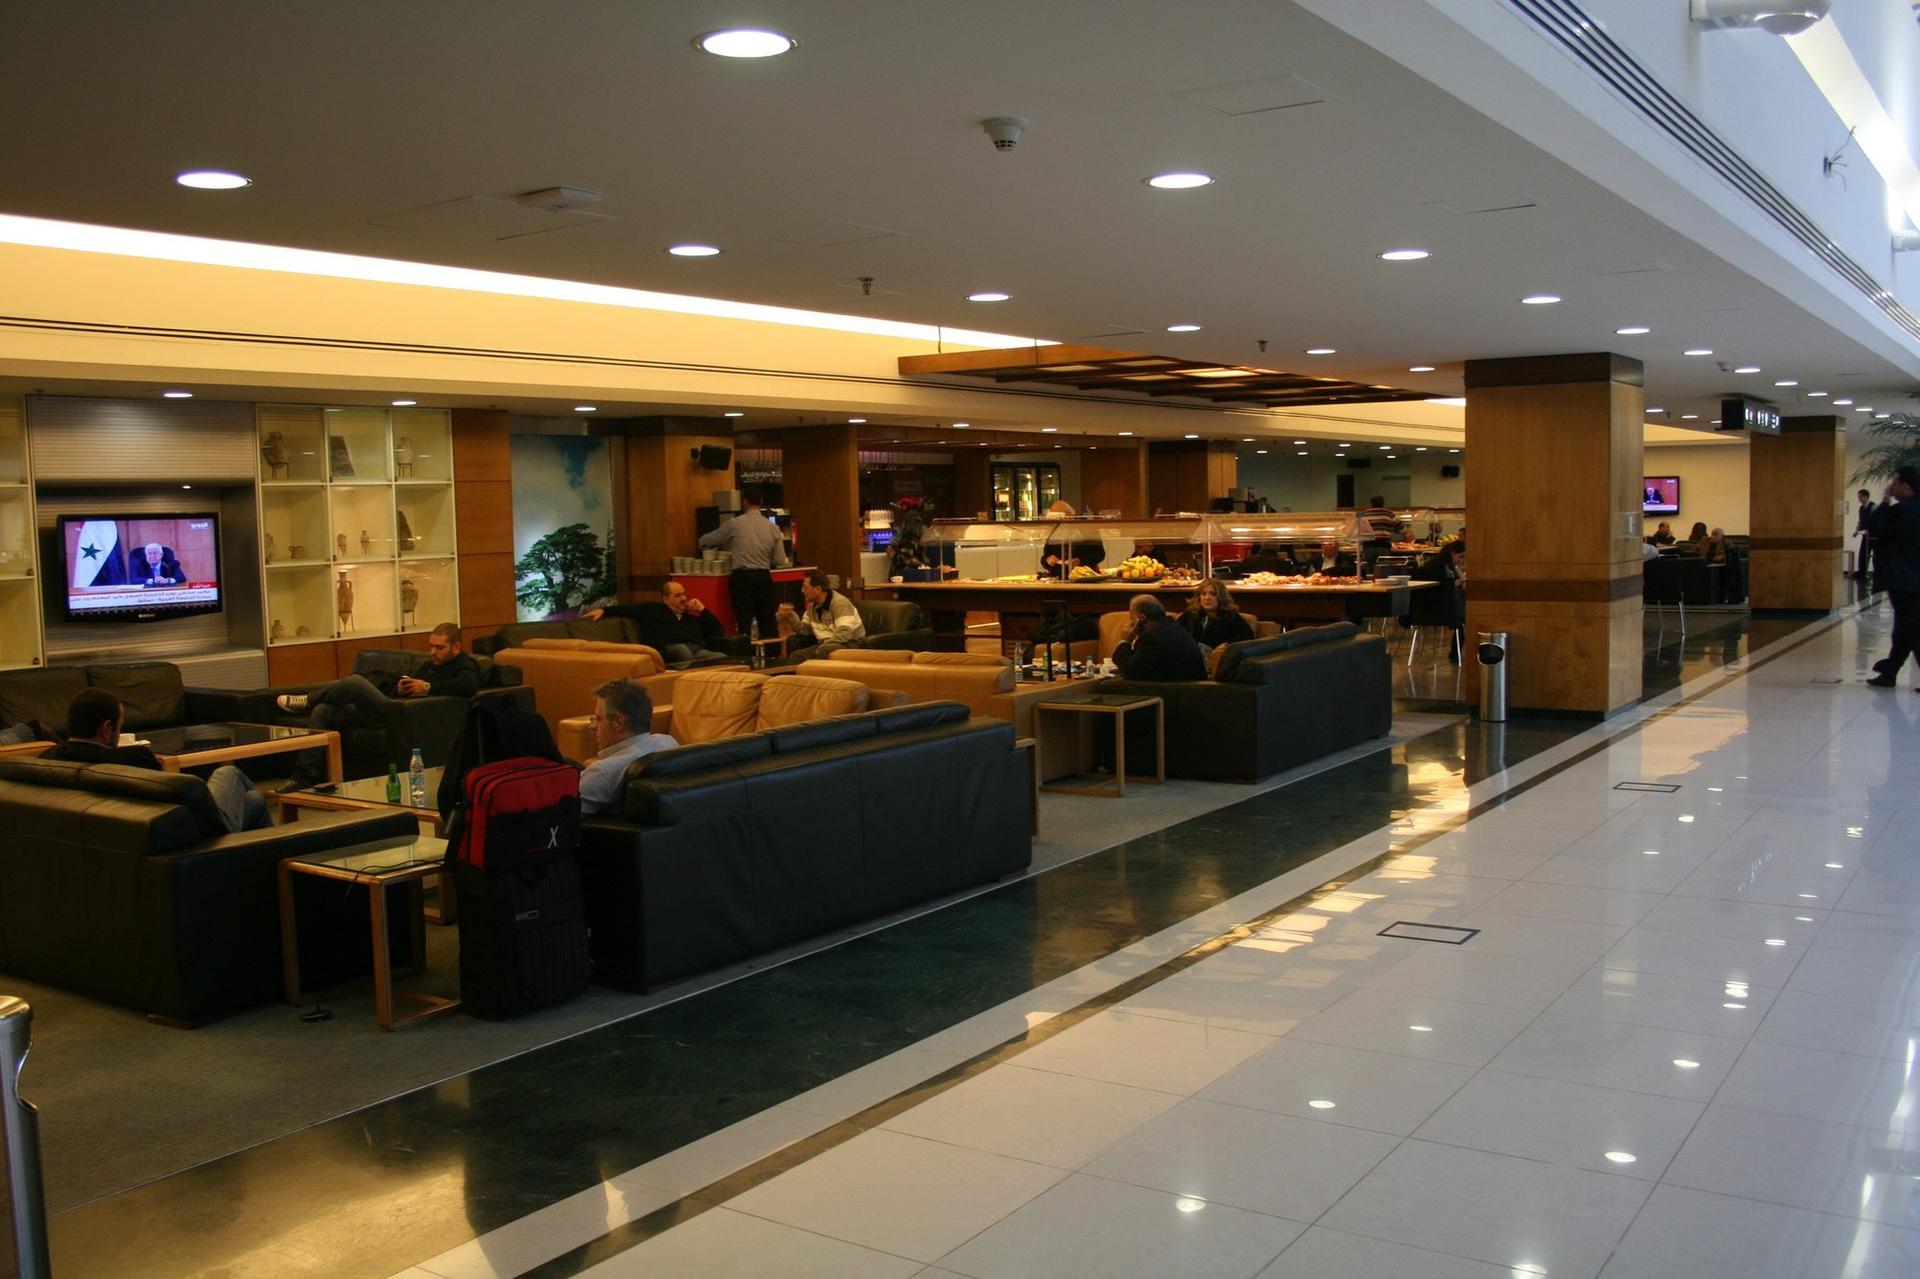 Middle East Airlines Cedar Lounge image 6 of 18